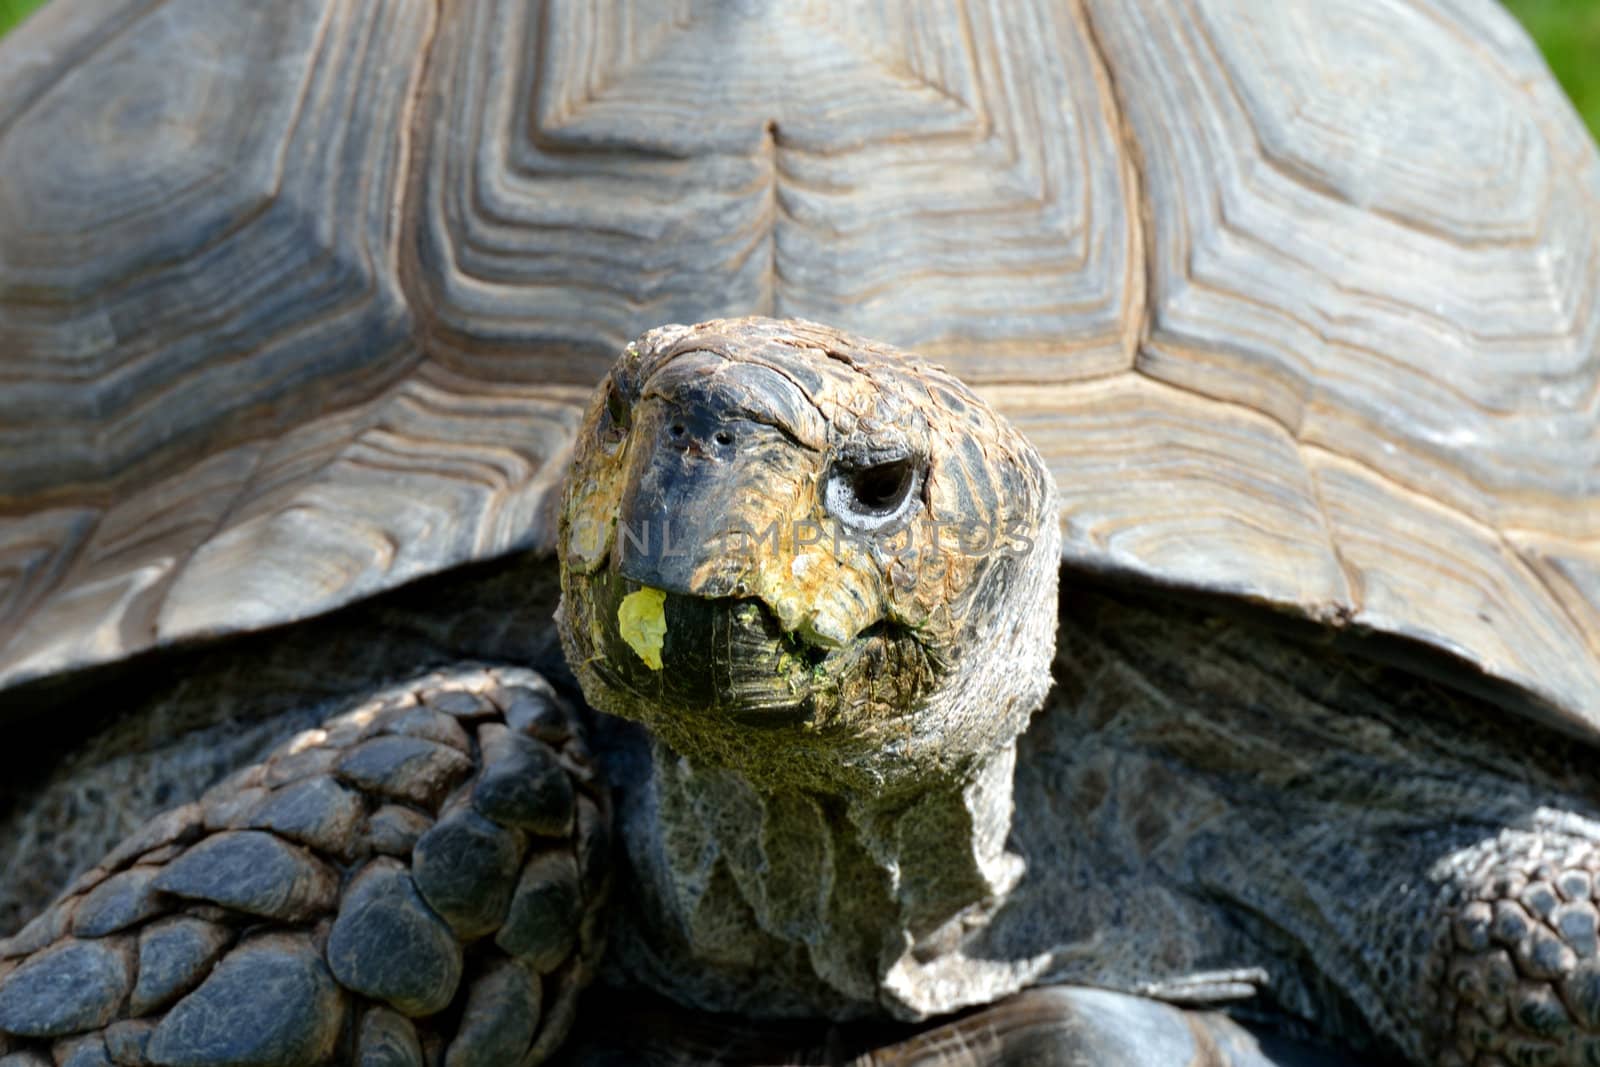 Tortoise head in close up by pauws99